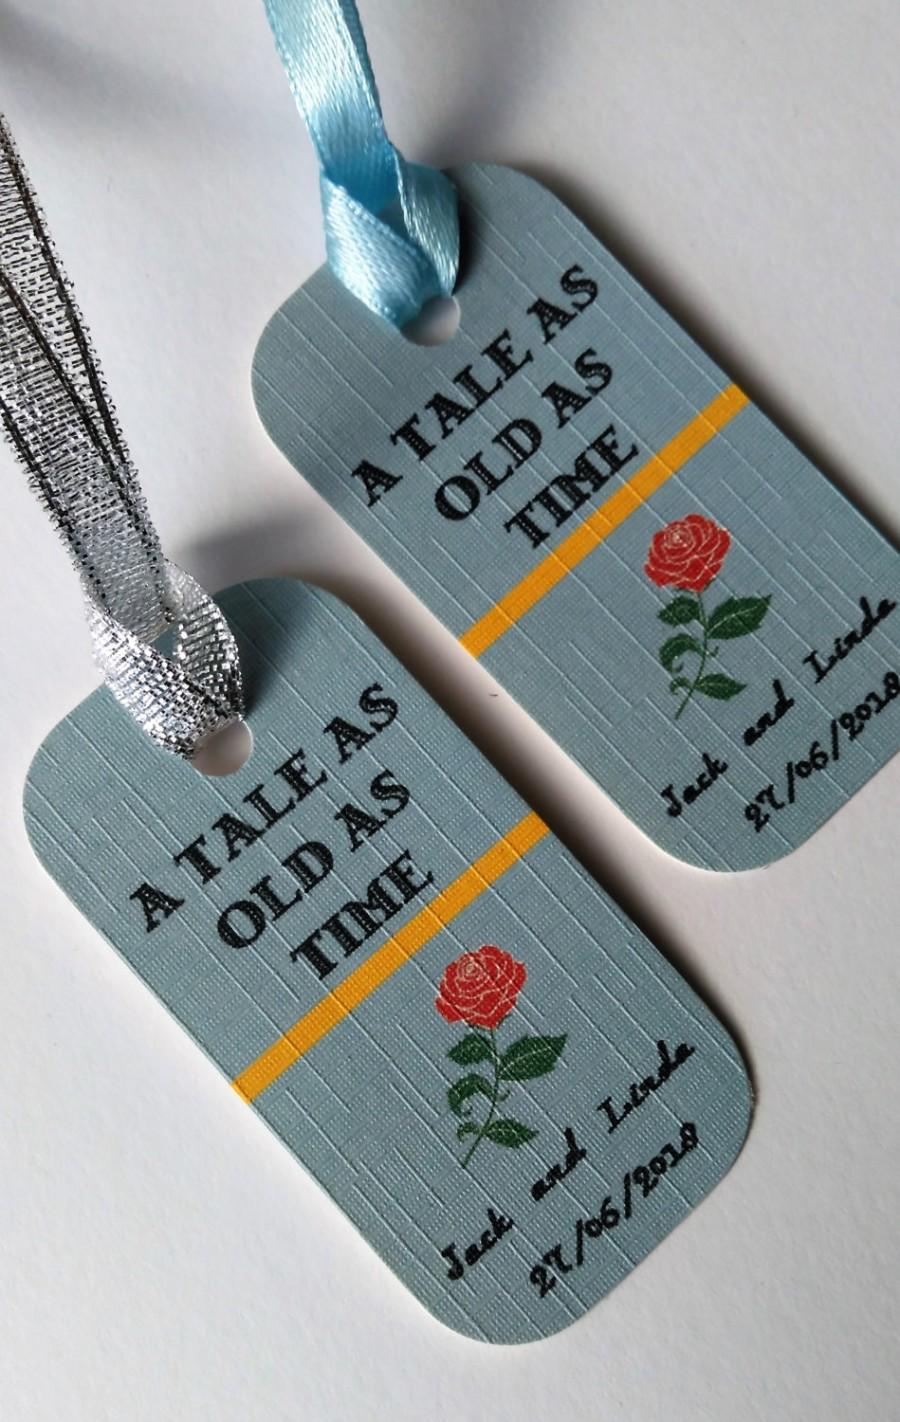 Mariage - A tale as old as time, Beauty and The Beast Wedding, fairytale wedding favour tags, wedding favor tags.